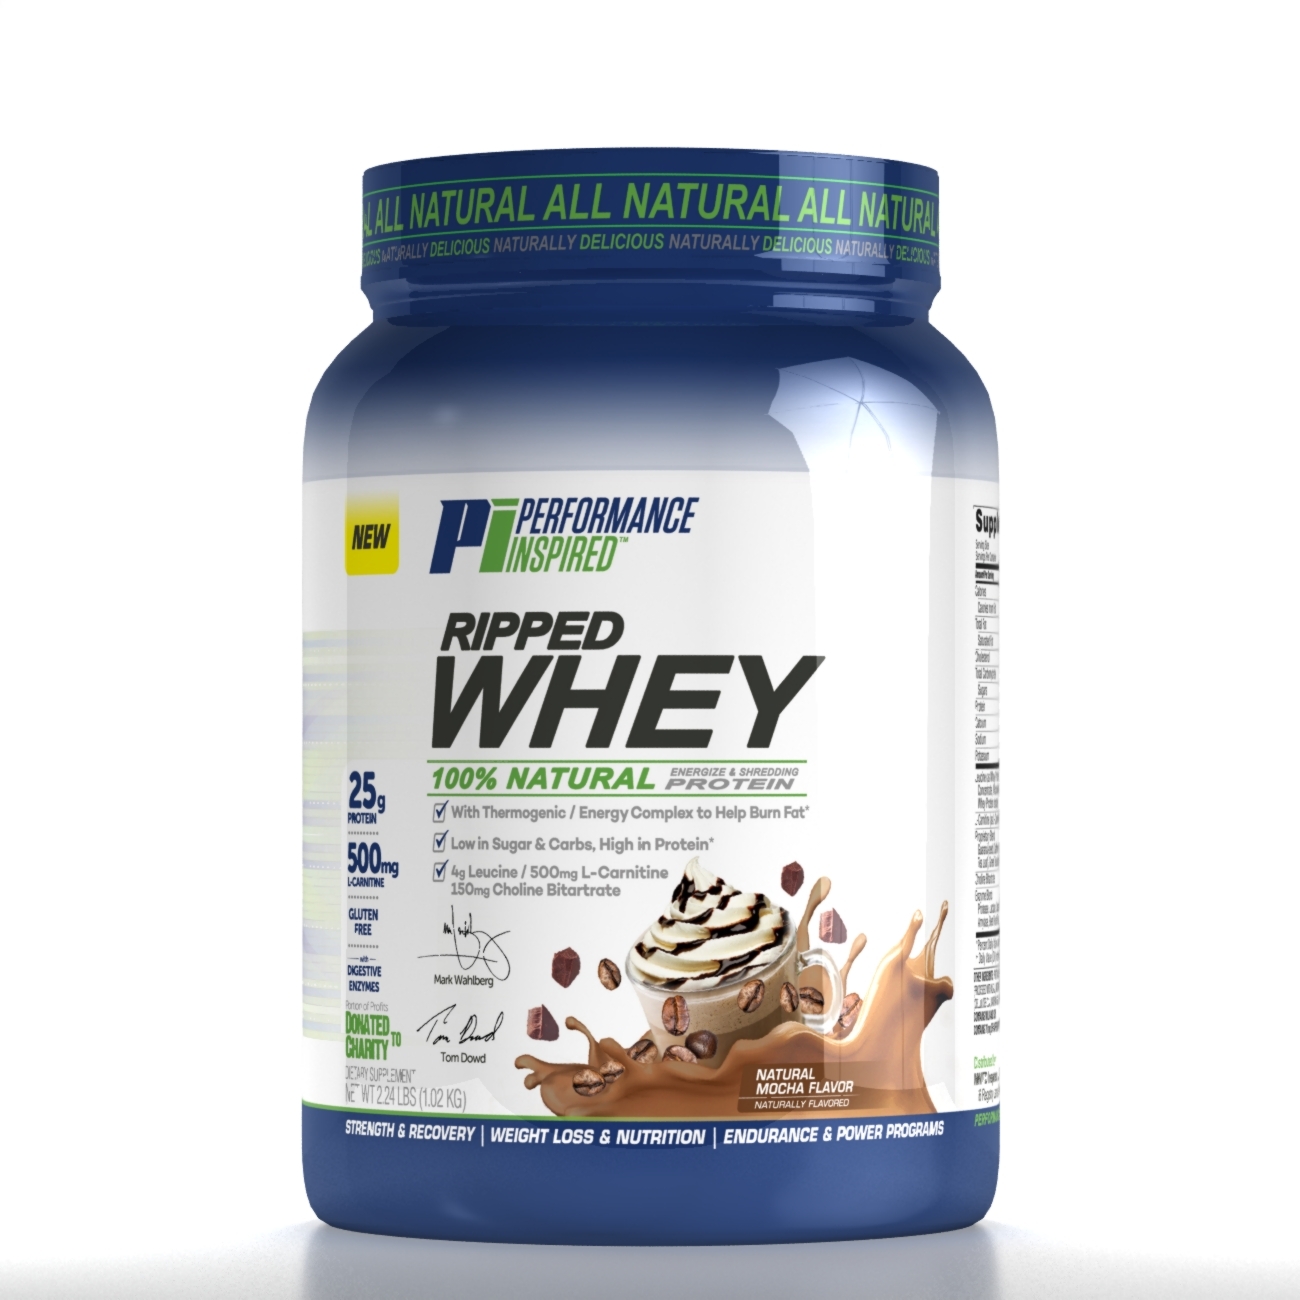 Performance Inspired Ripped Whey